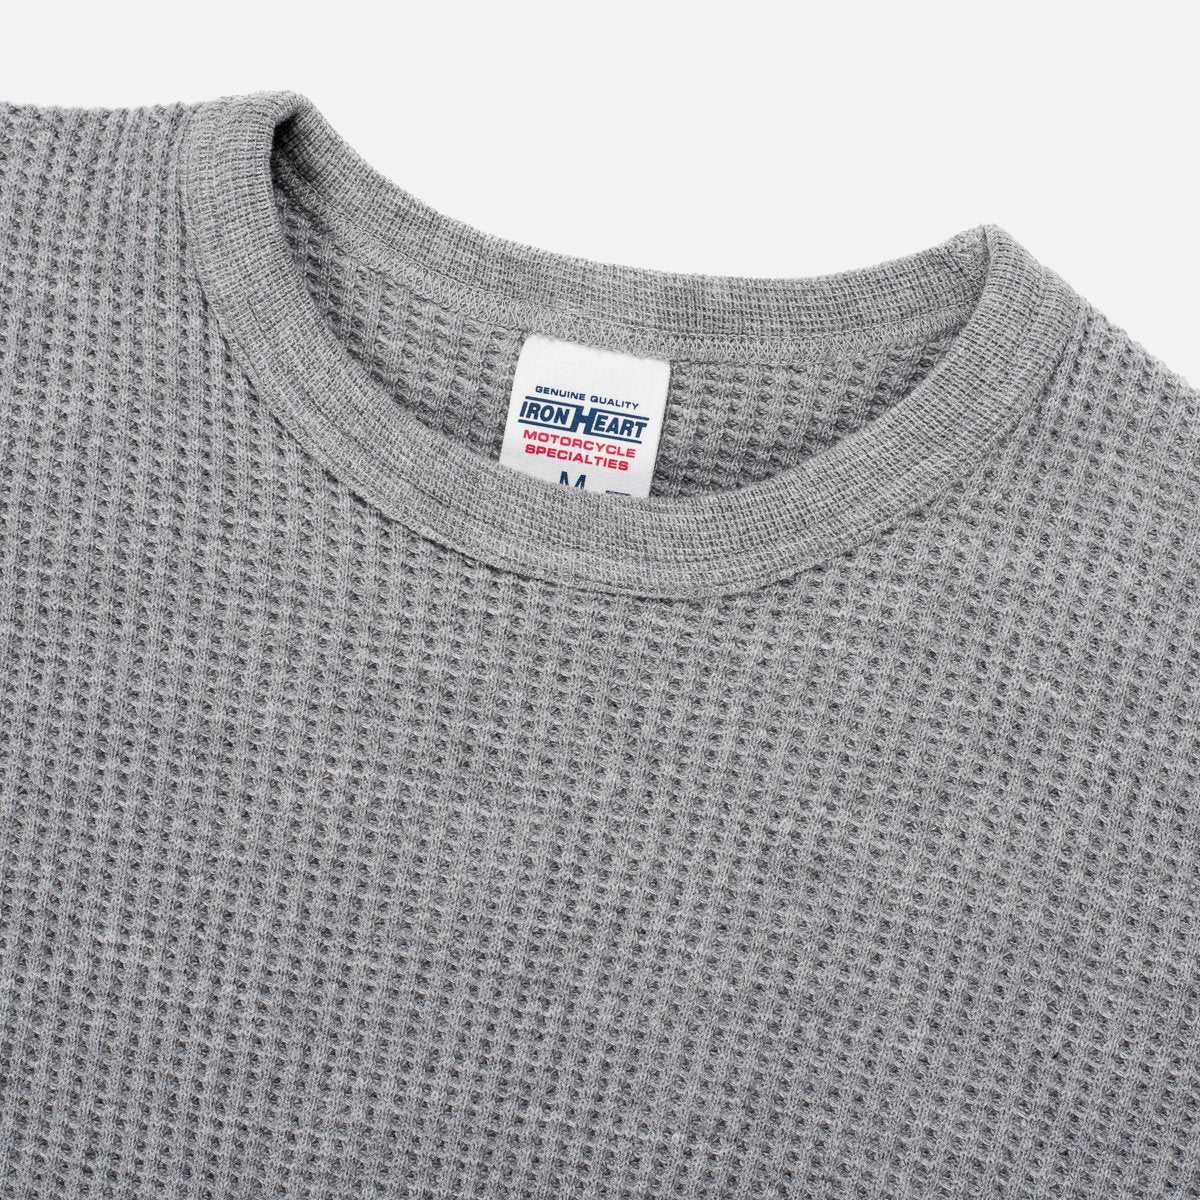 IHTL-1301-GRY Waffle Knit Long Sleeve Crew Neck Thermal Grey